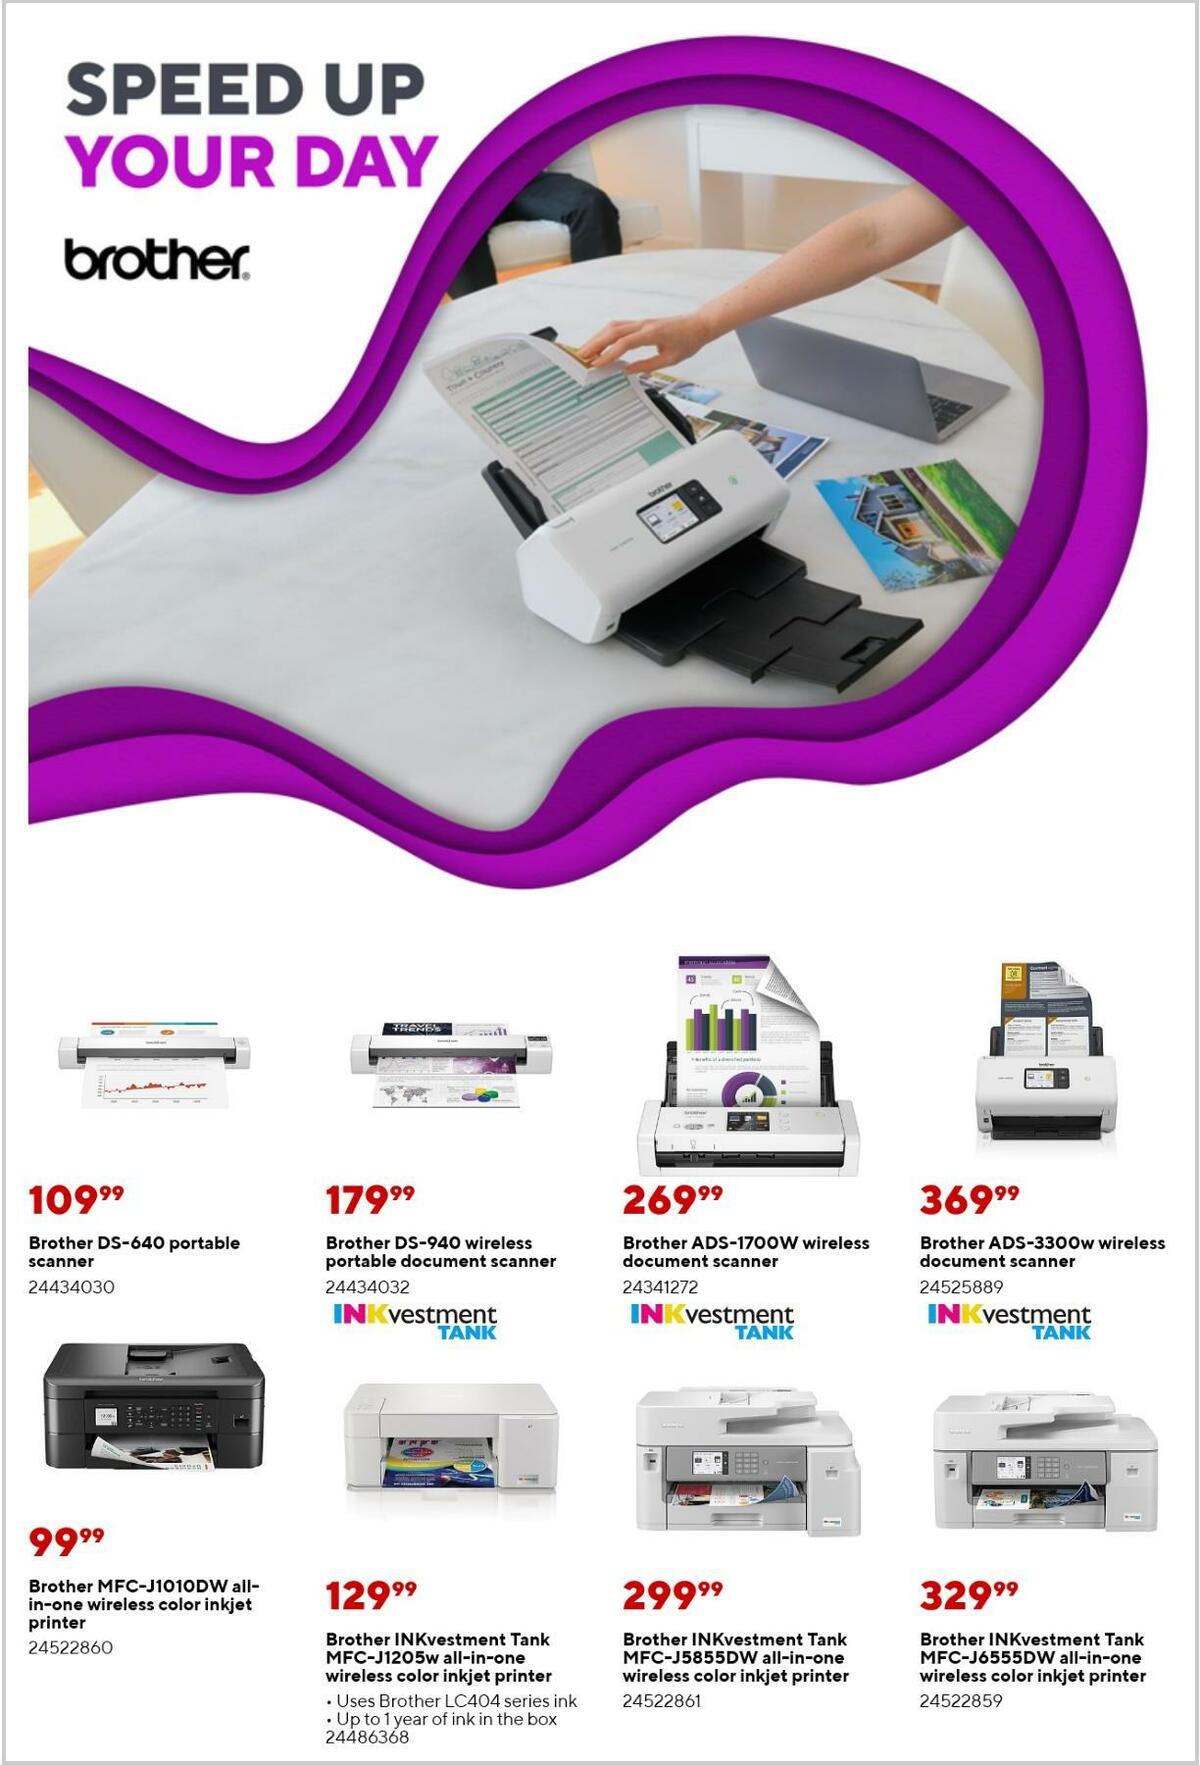 Staples Weekly Ad from September 25